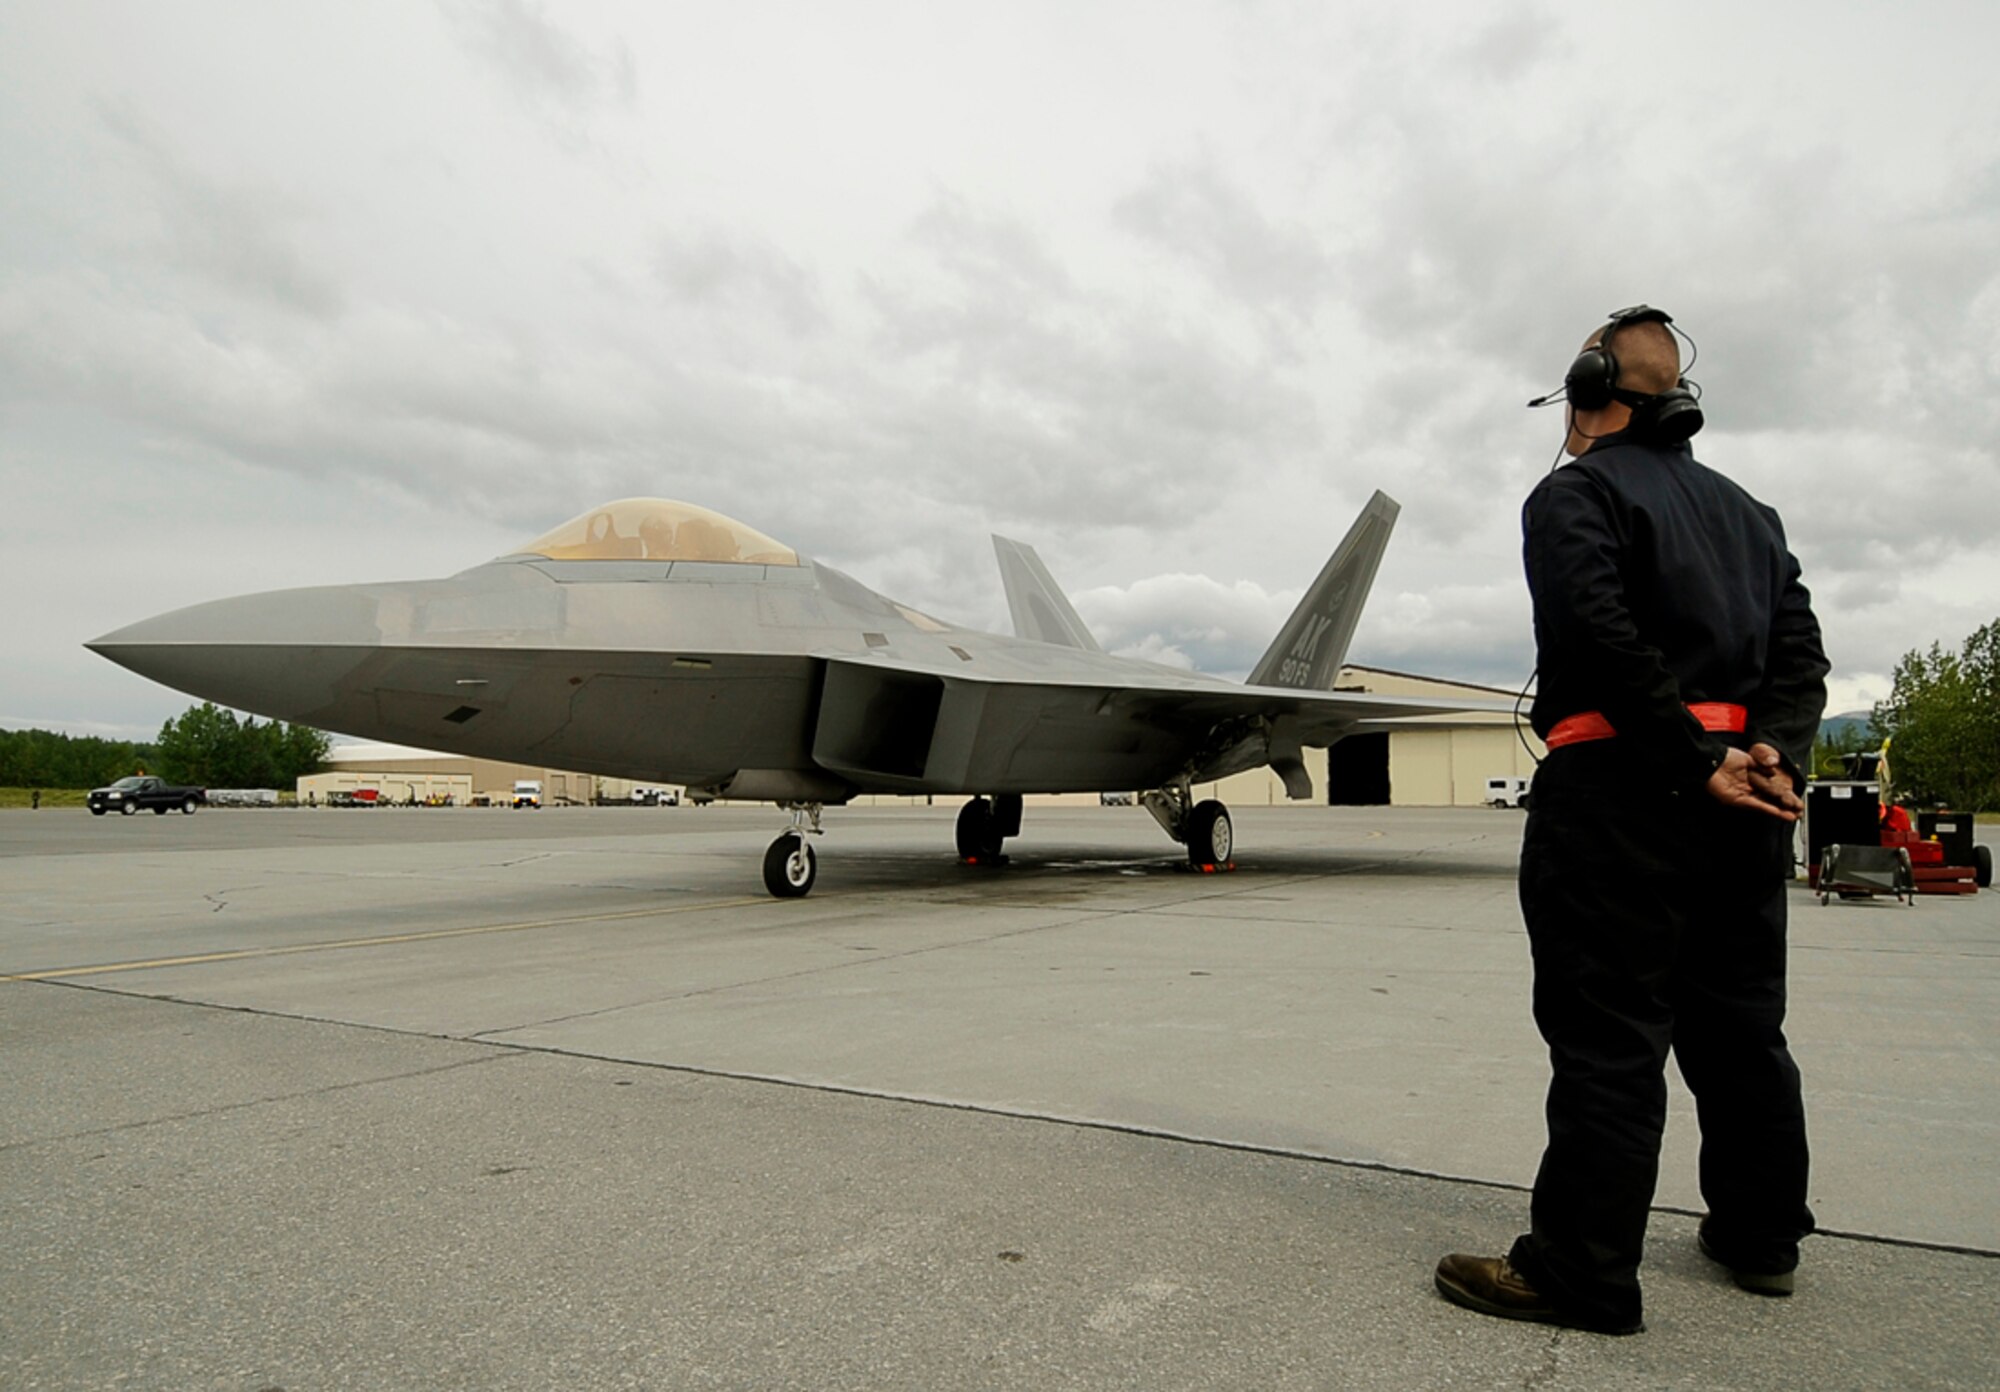 Airman 1st Class Holden Coladonato from the 90th Fighter Squadron, Elmendorf AFB, Alaska, prepares a F-22 Raptor for take off during exercise Northern Edge 2009, Elmendorf AFB, Alaska, June 17, 2009.  Northern Edge 2009 is Alaska's largest military training exercise.  It prepares joint forces to respond to crises throughout the Asia-Pacific region.  (Released/U.S. Air Force photo by TSgt Dennis J. Henry Jr.)